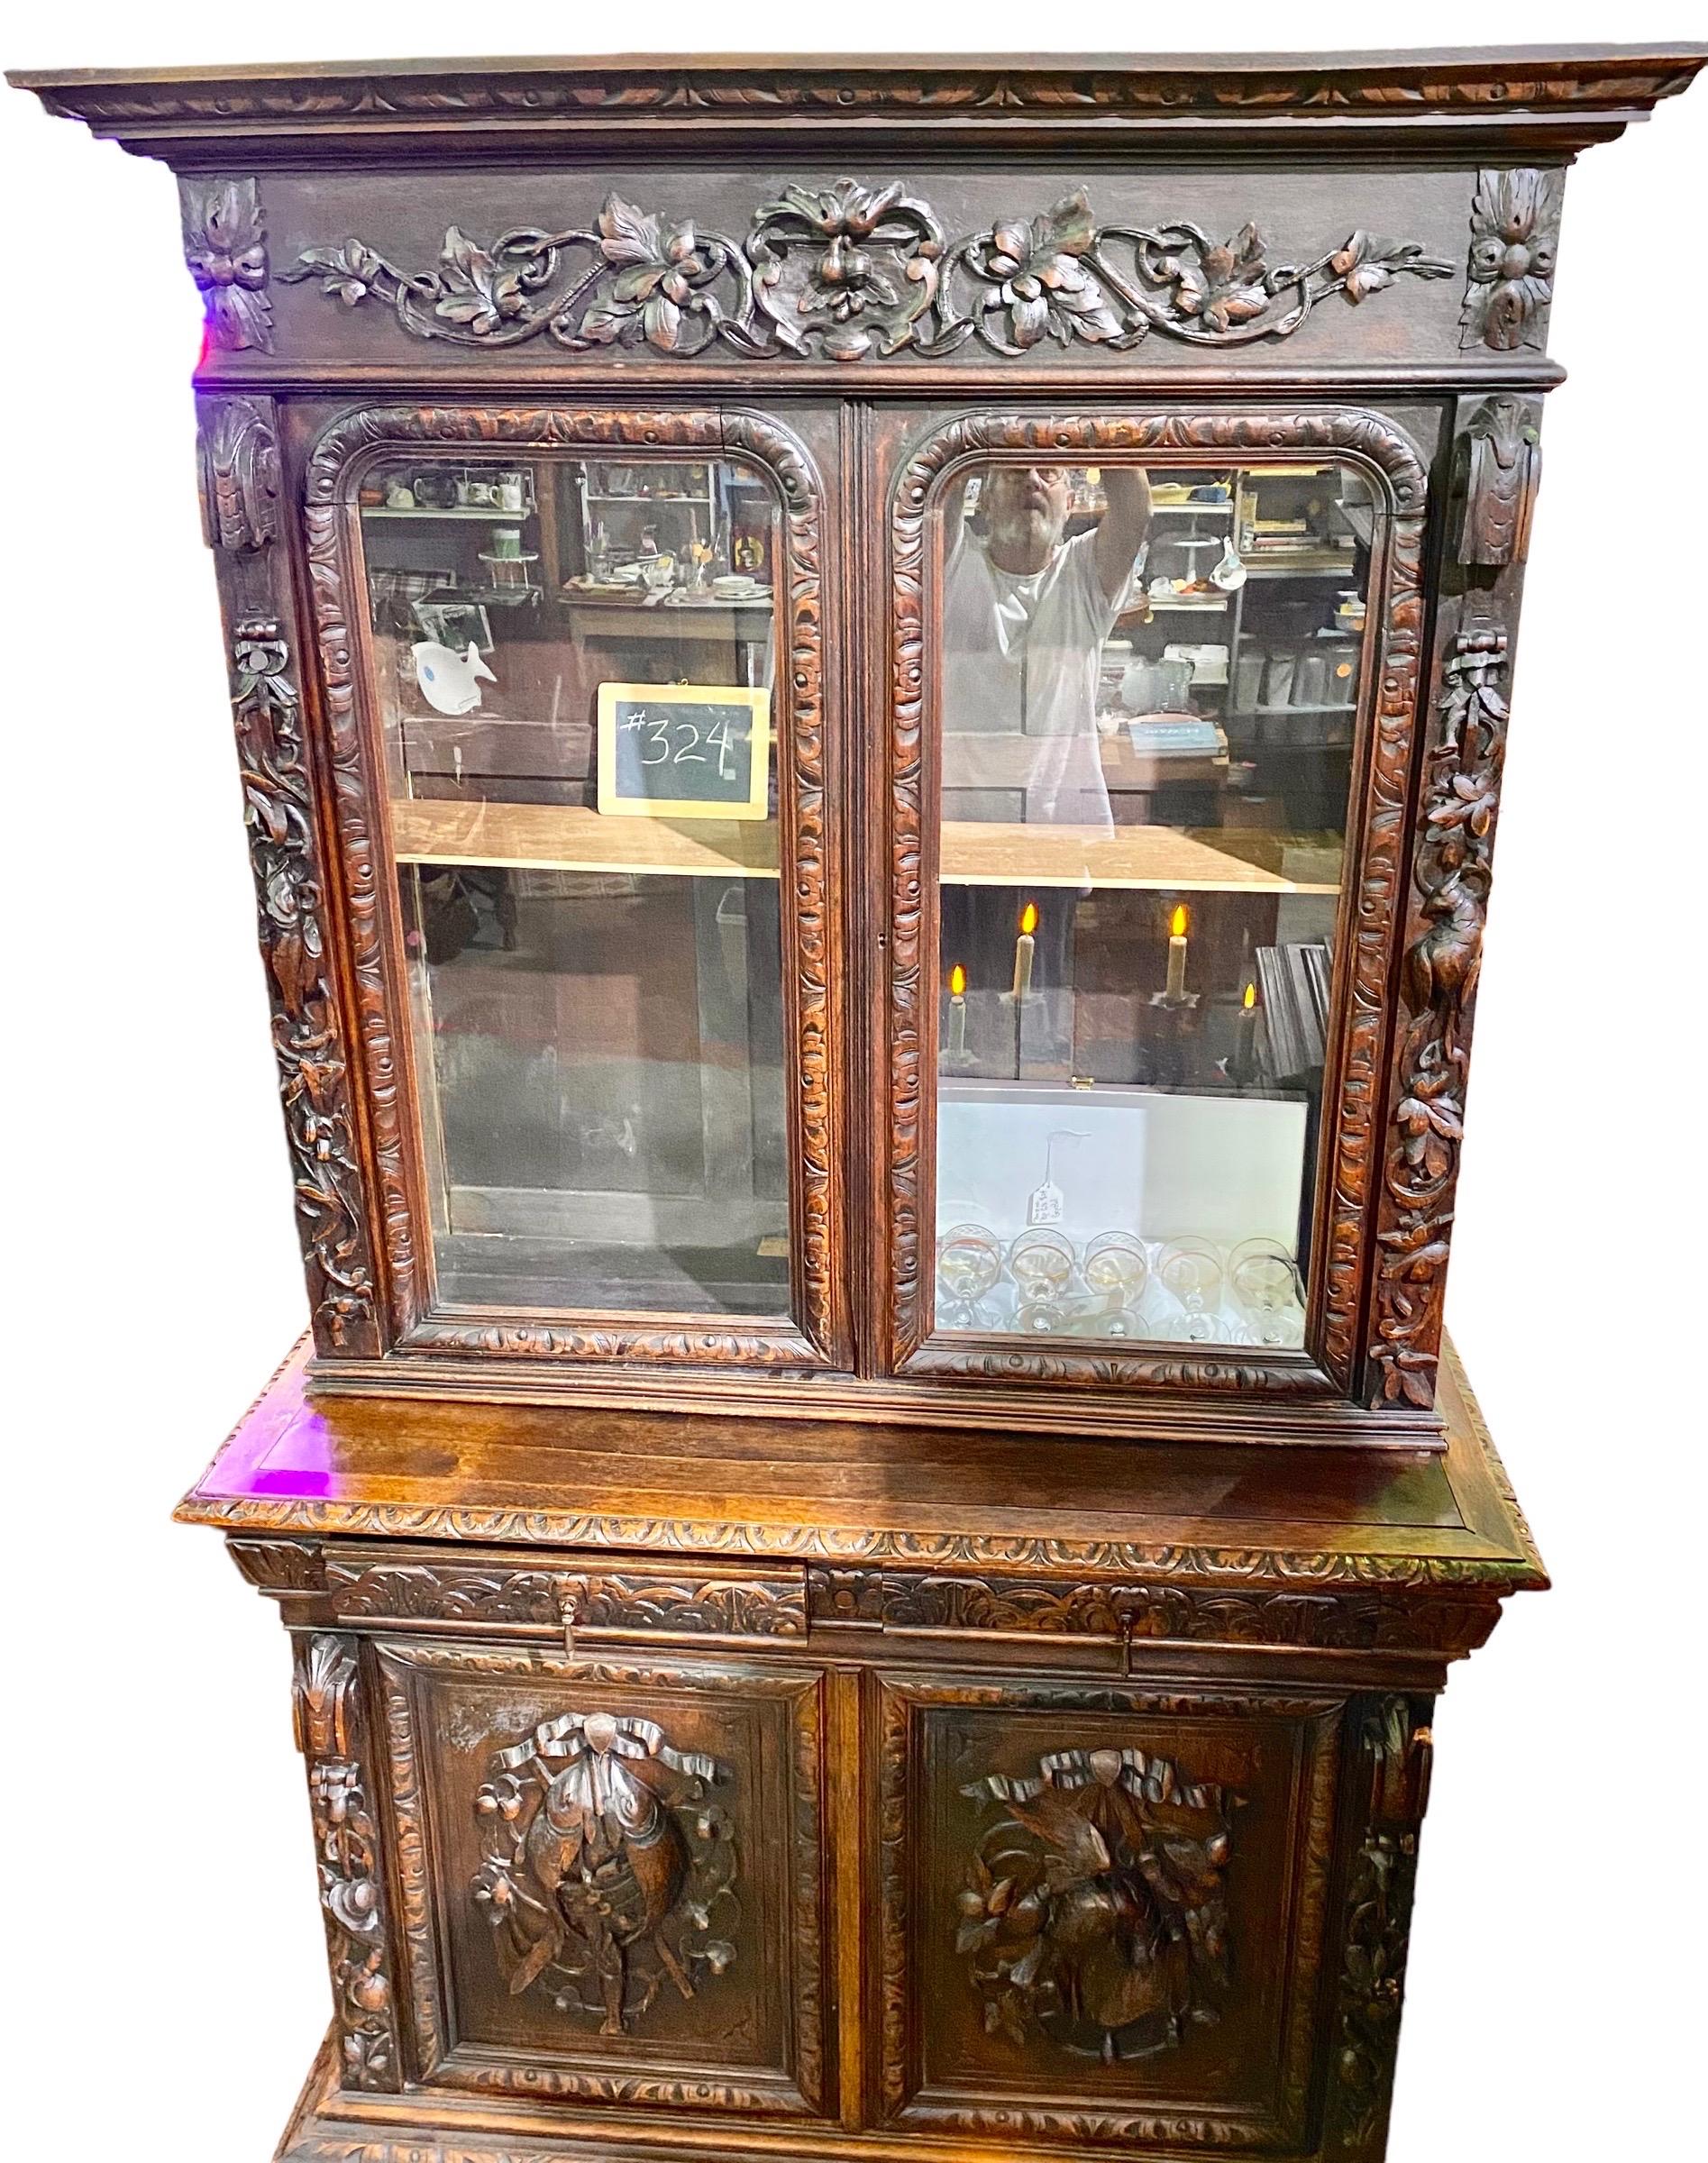 A handsome antique carved oak French Henri II cabinet/cupboard having extensive carving of leaves, tendrils, fish and fruit, glass doors, two carved drawers and two carved wooden doors, with one shelf behind. 

Could be a walk up bar/liquor